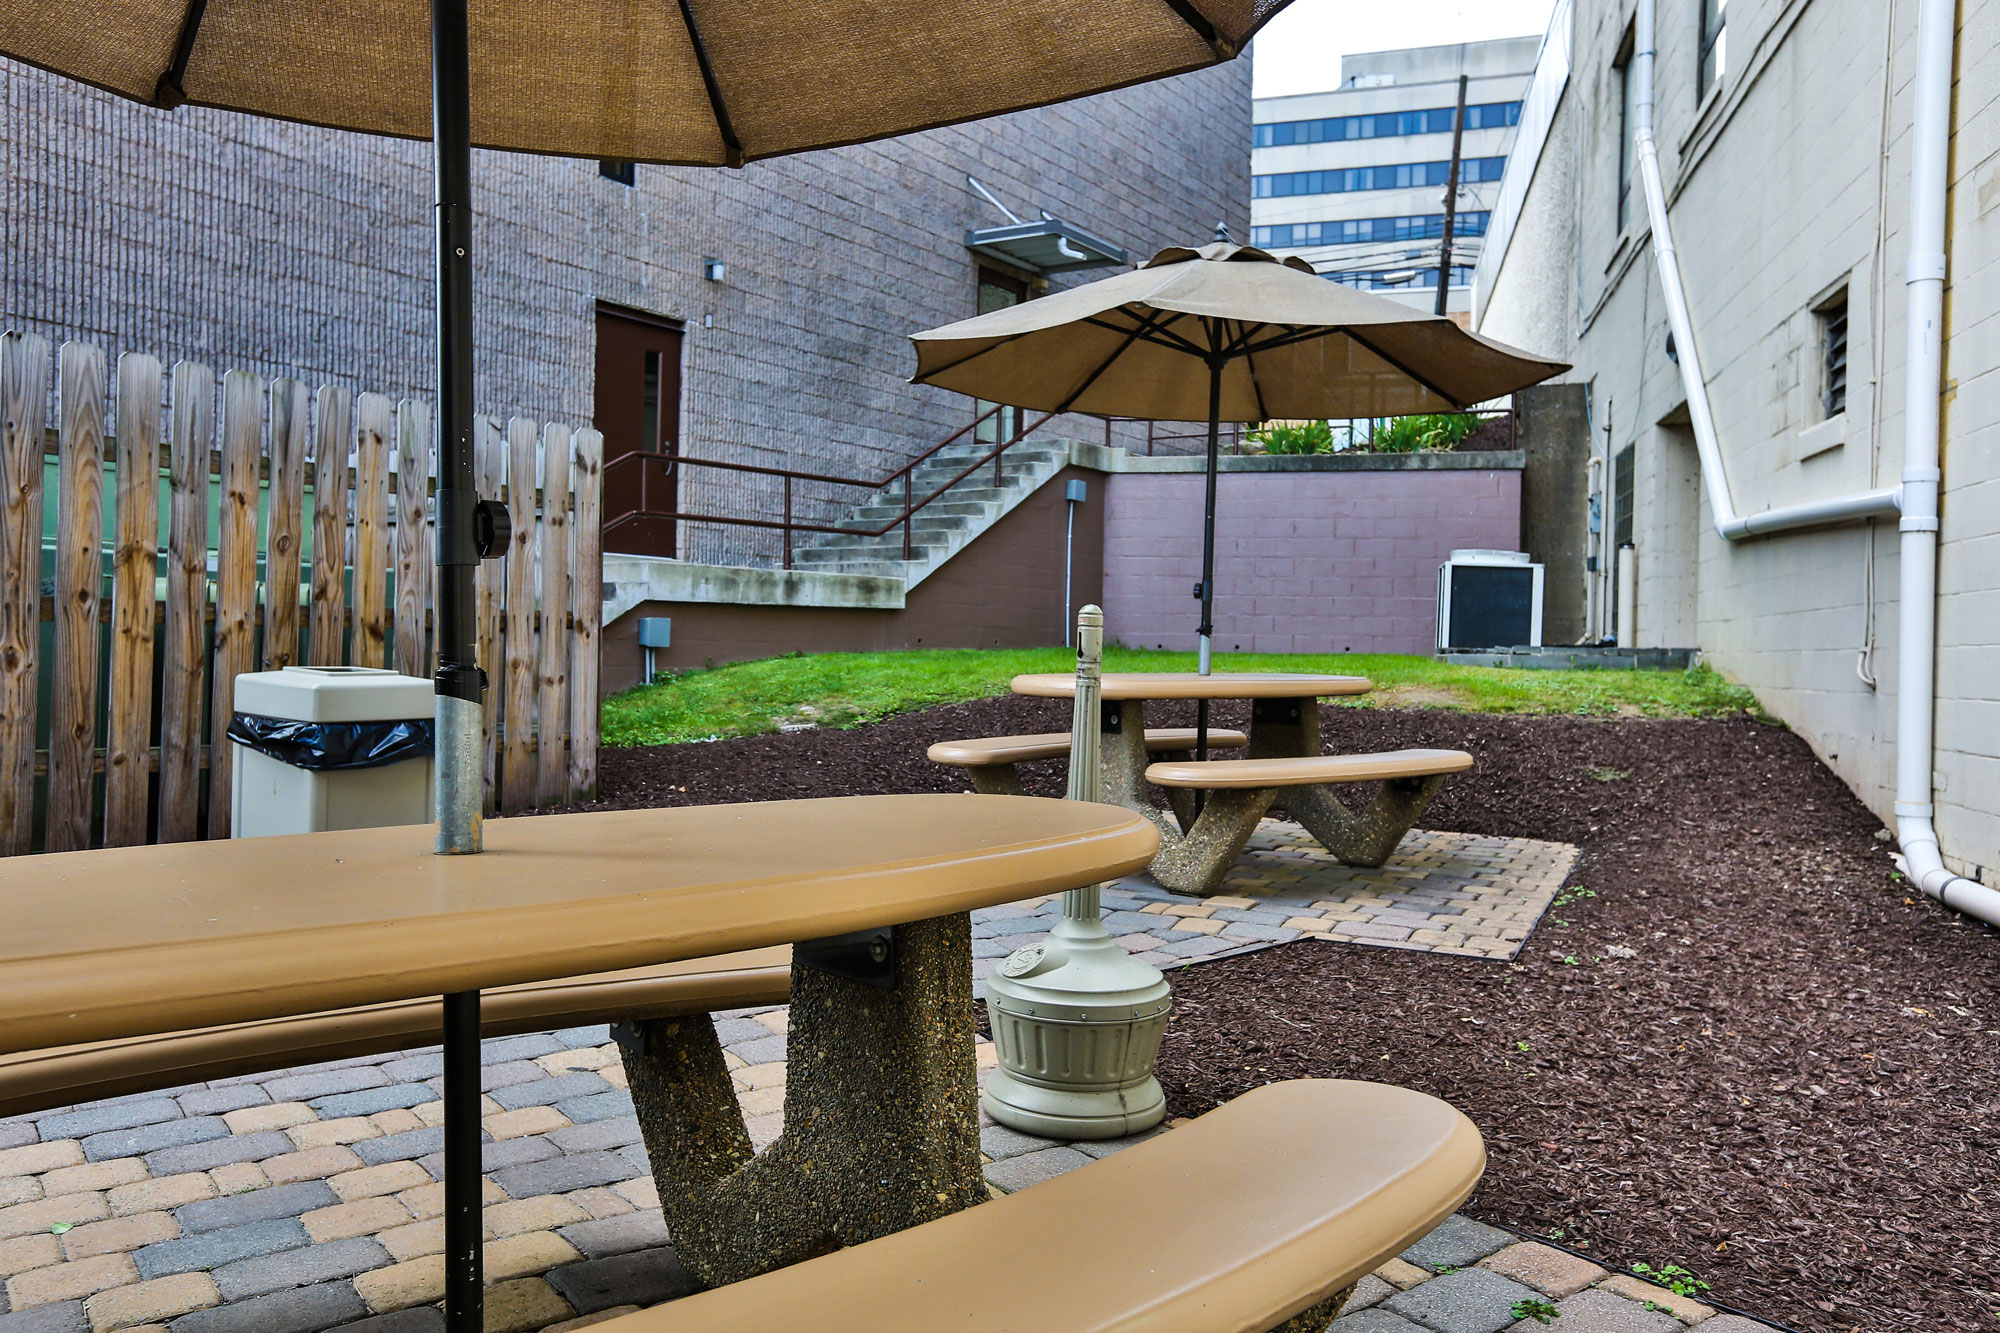 Outdoor private patio area with umbrellas and tables to sit at